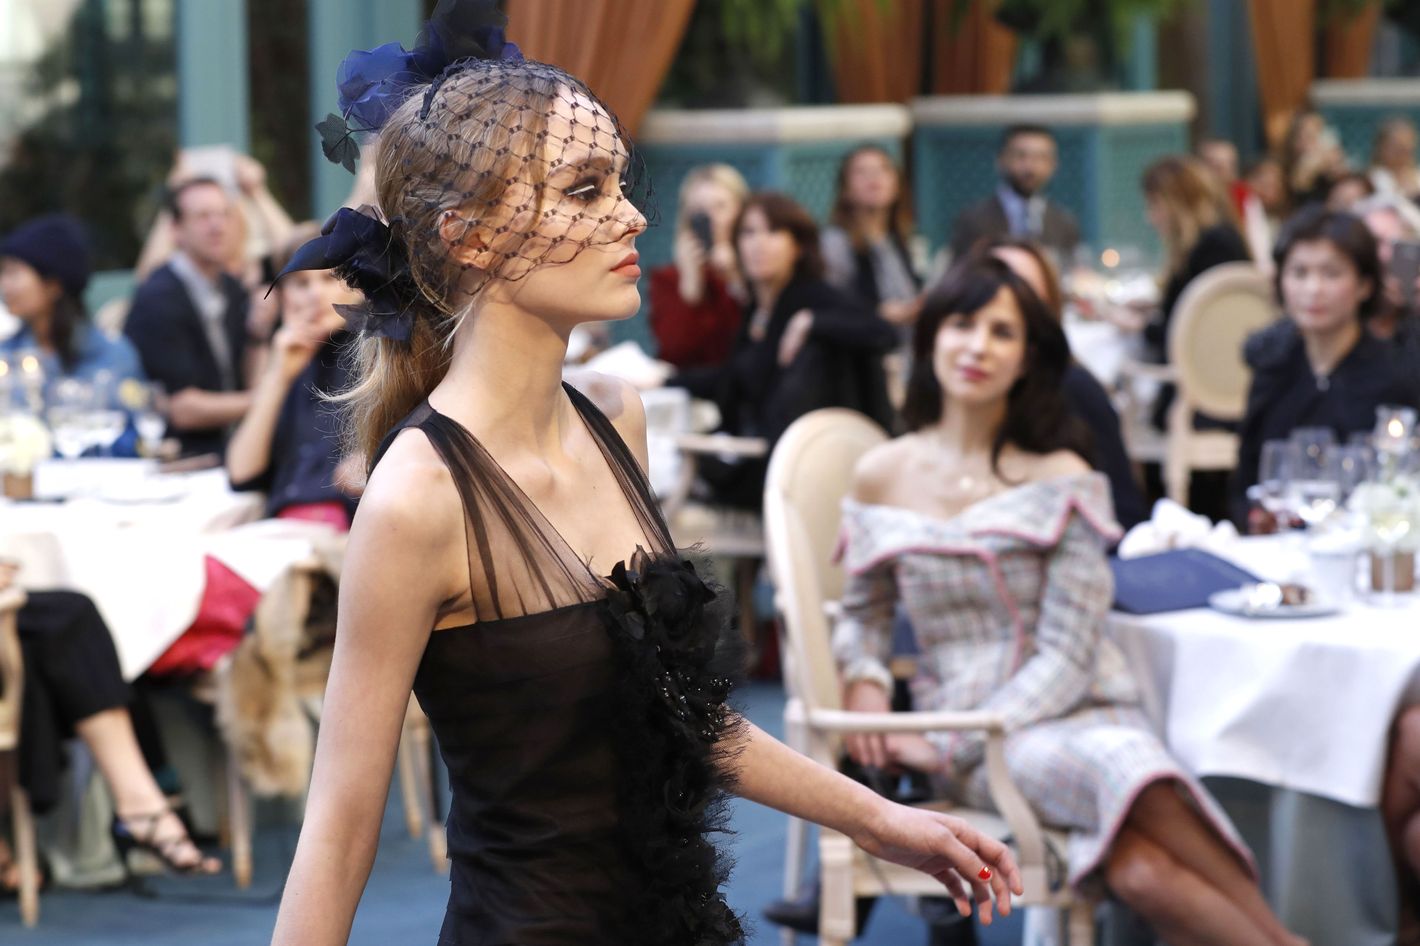 Lily-Rose Depp Closes the Chanel Haute Couture Show